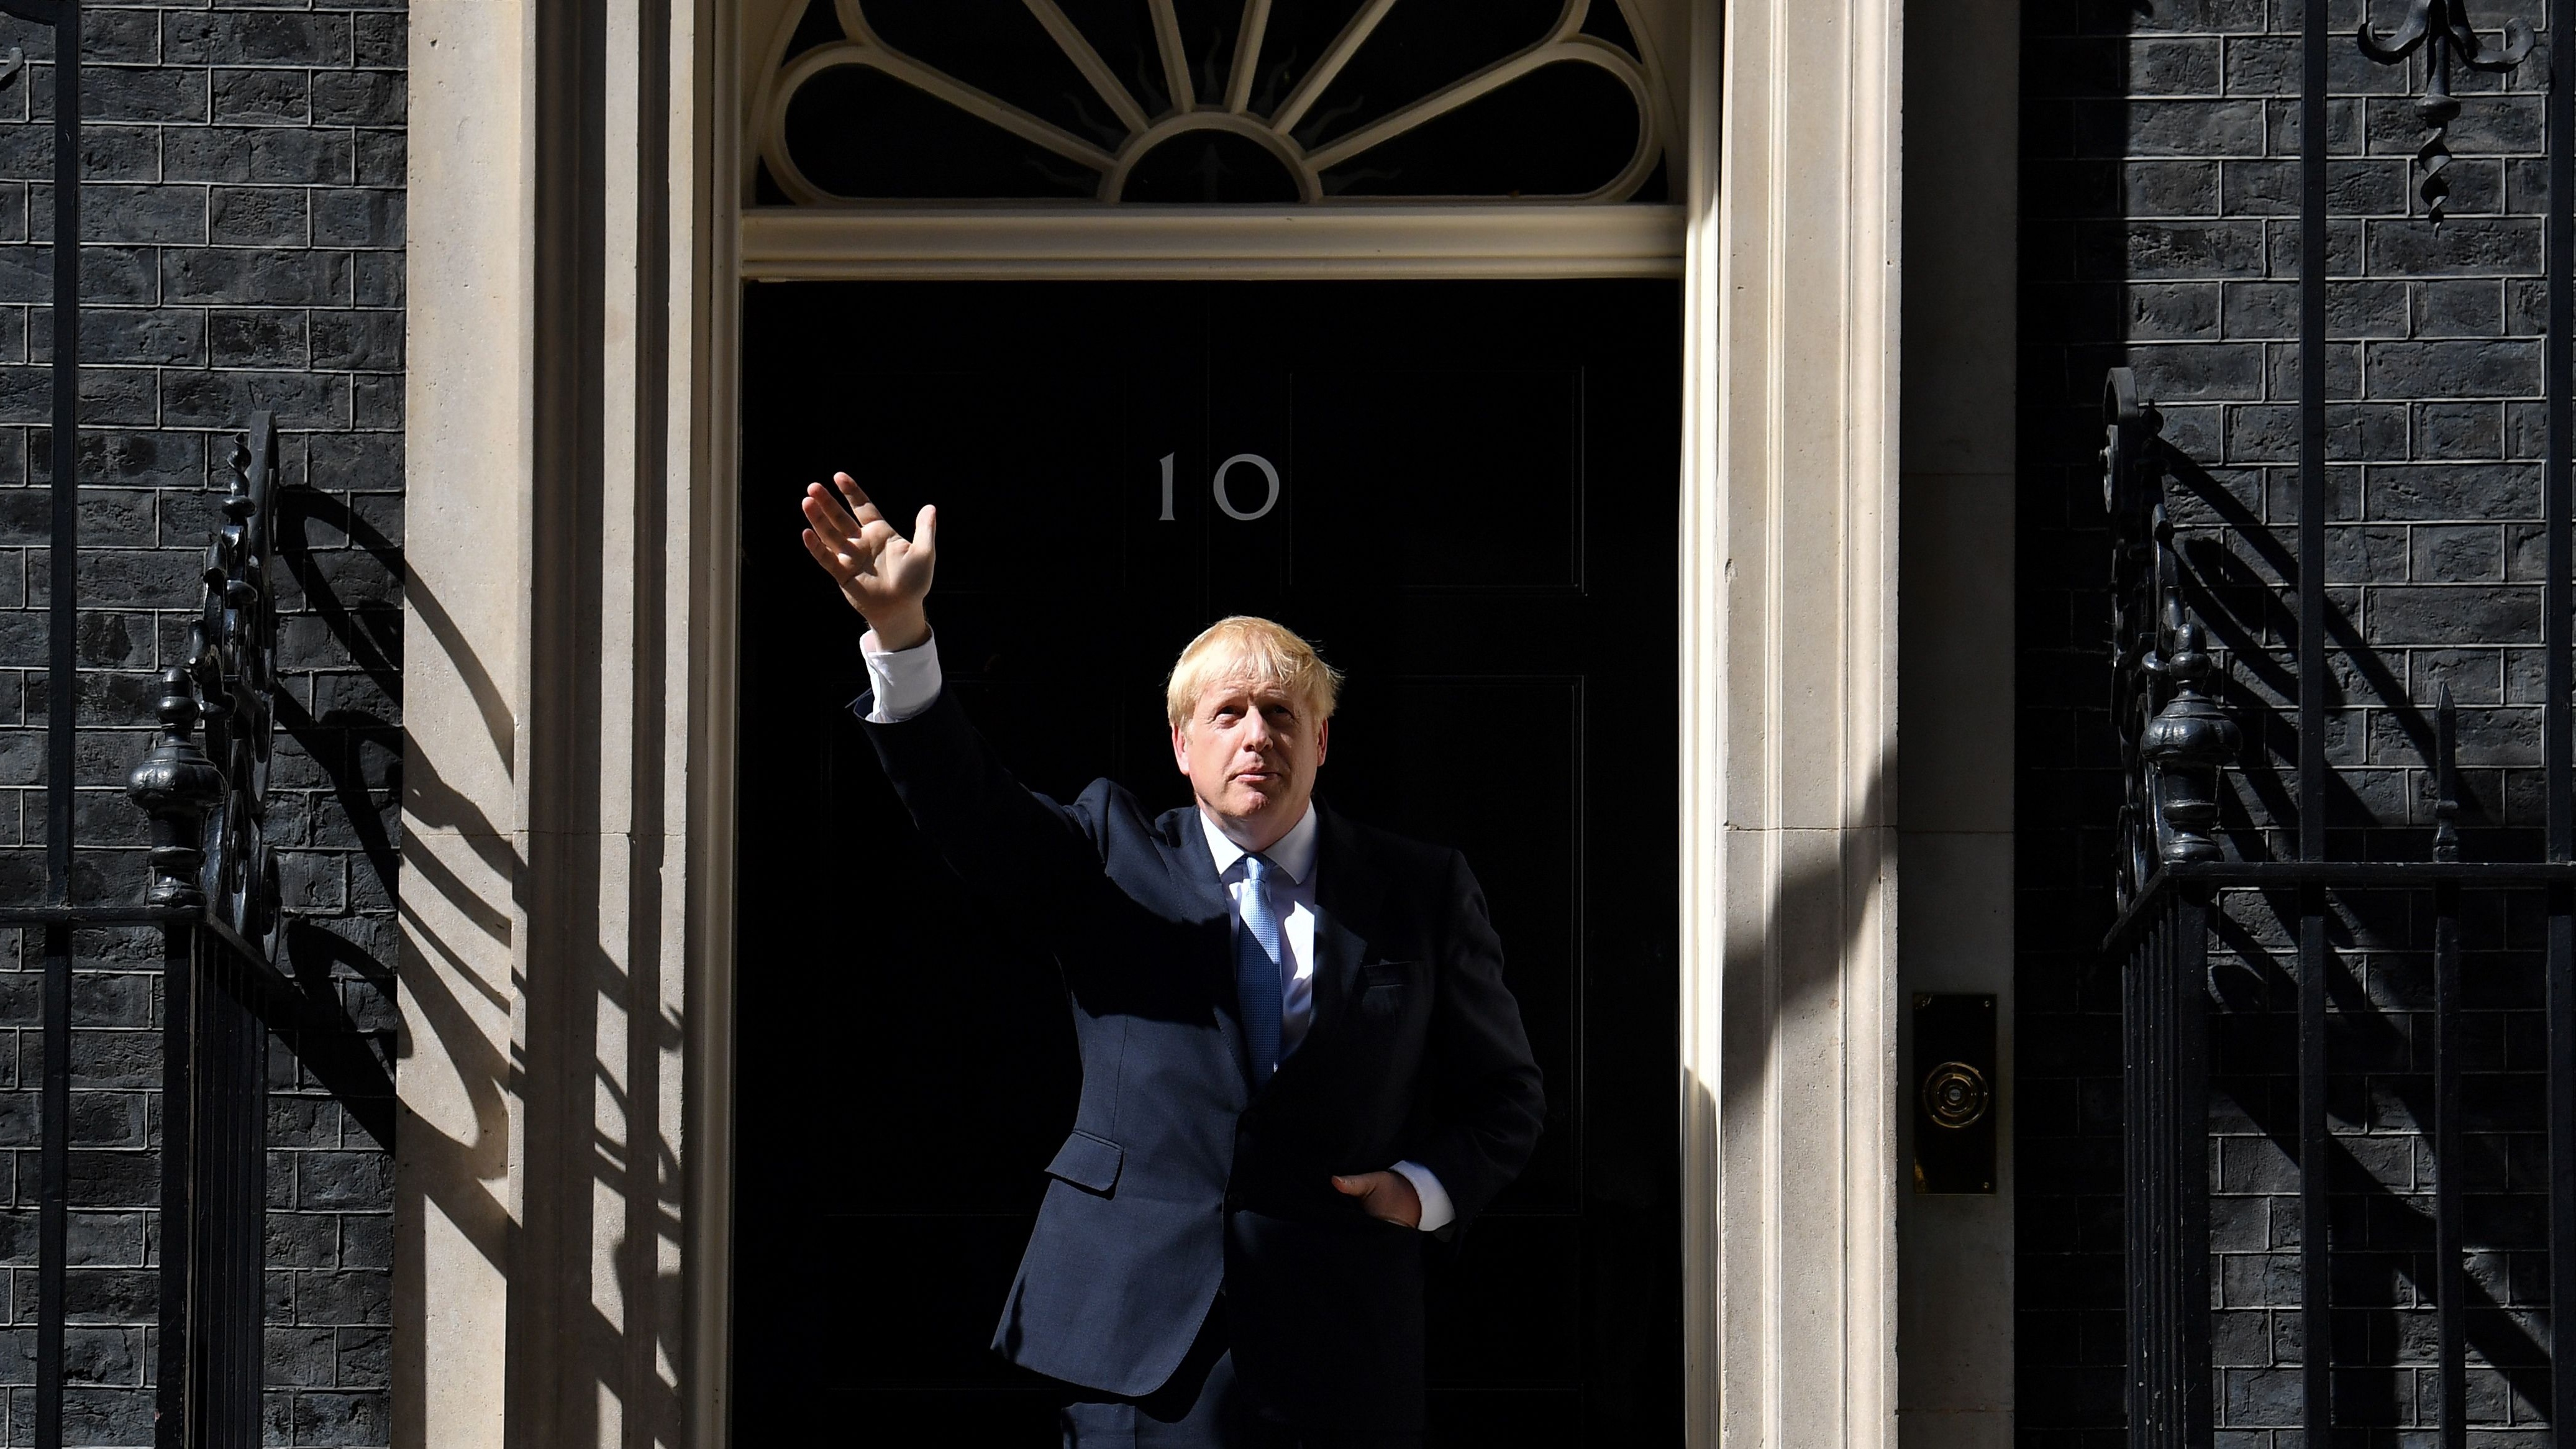 Prime Minister Boris Johnson gestures after giving a speech outside 10 Downing Street in London.